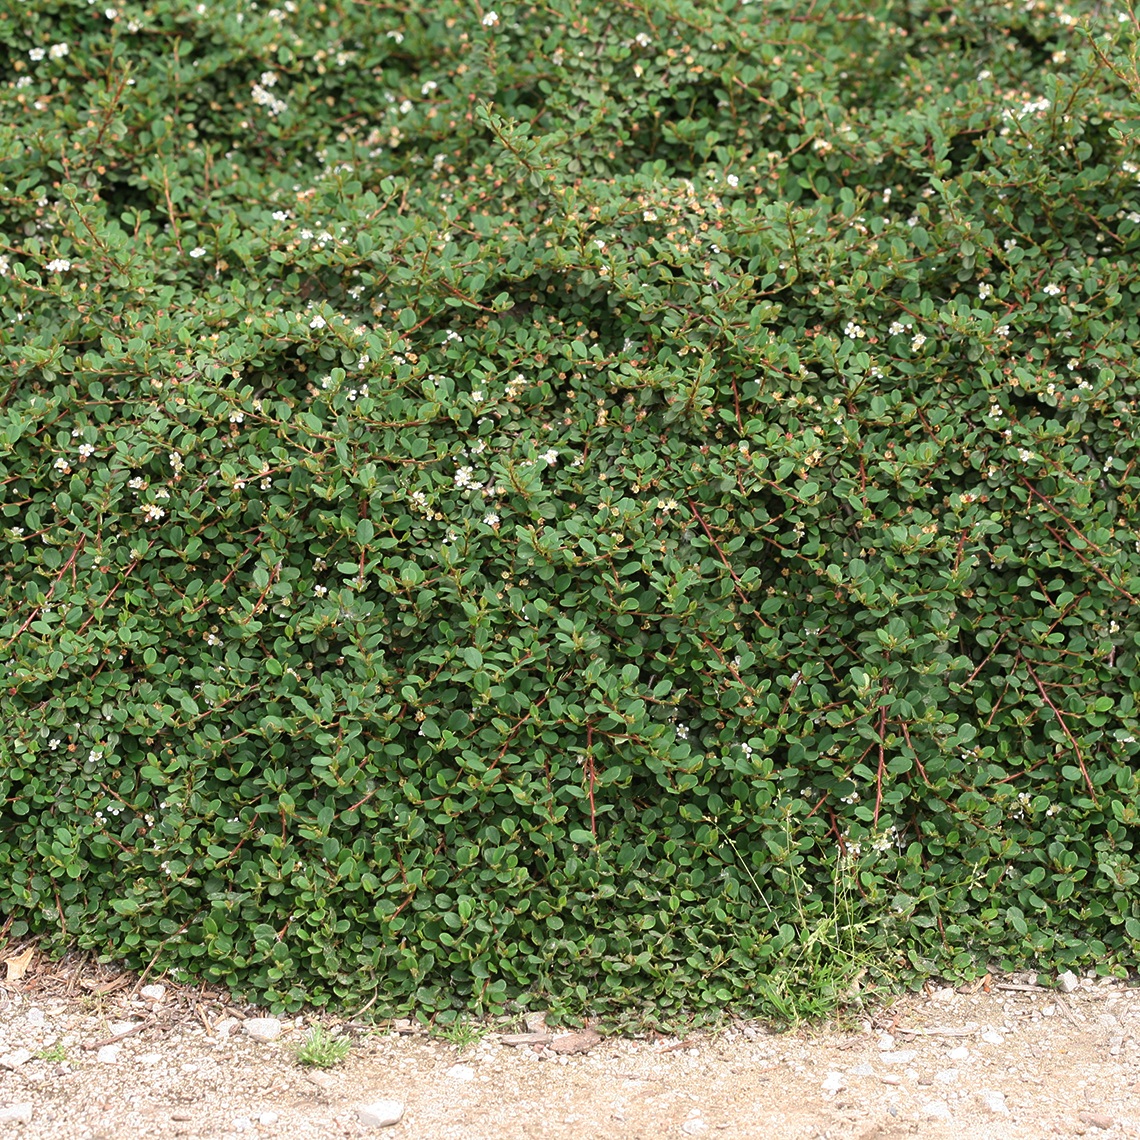 Thick blanket of flowering Little Dipper Cotoneaster